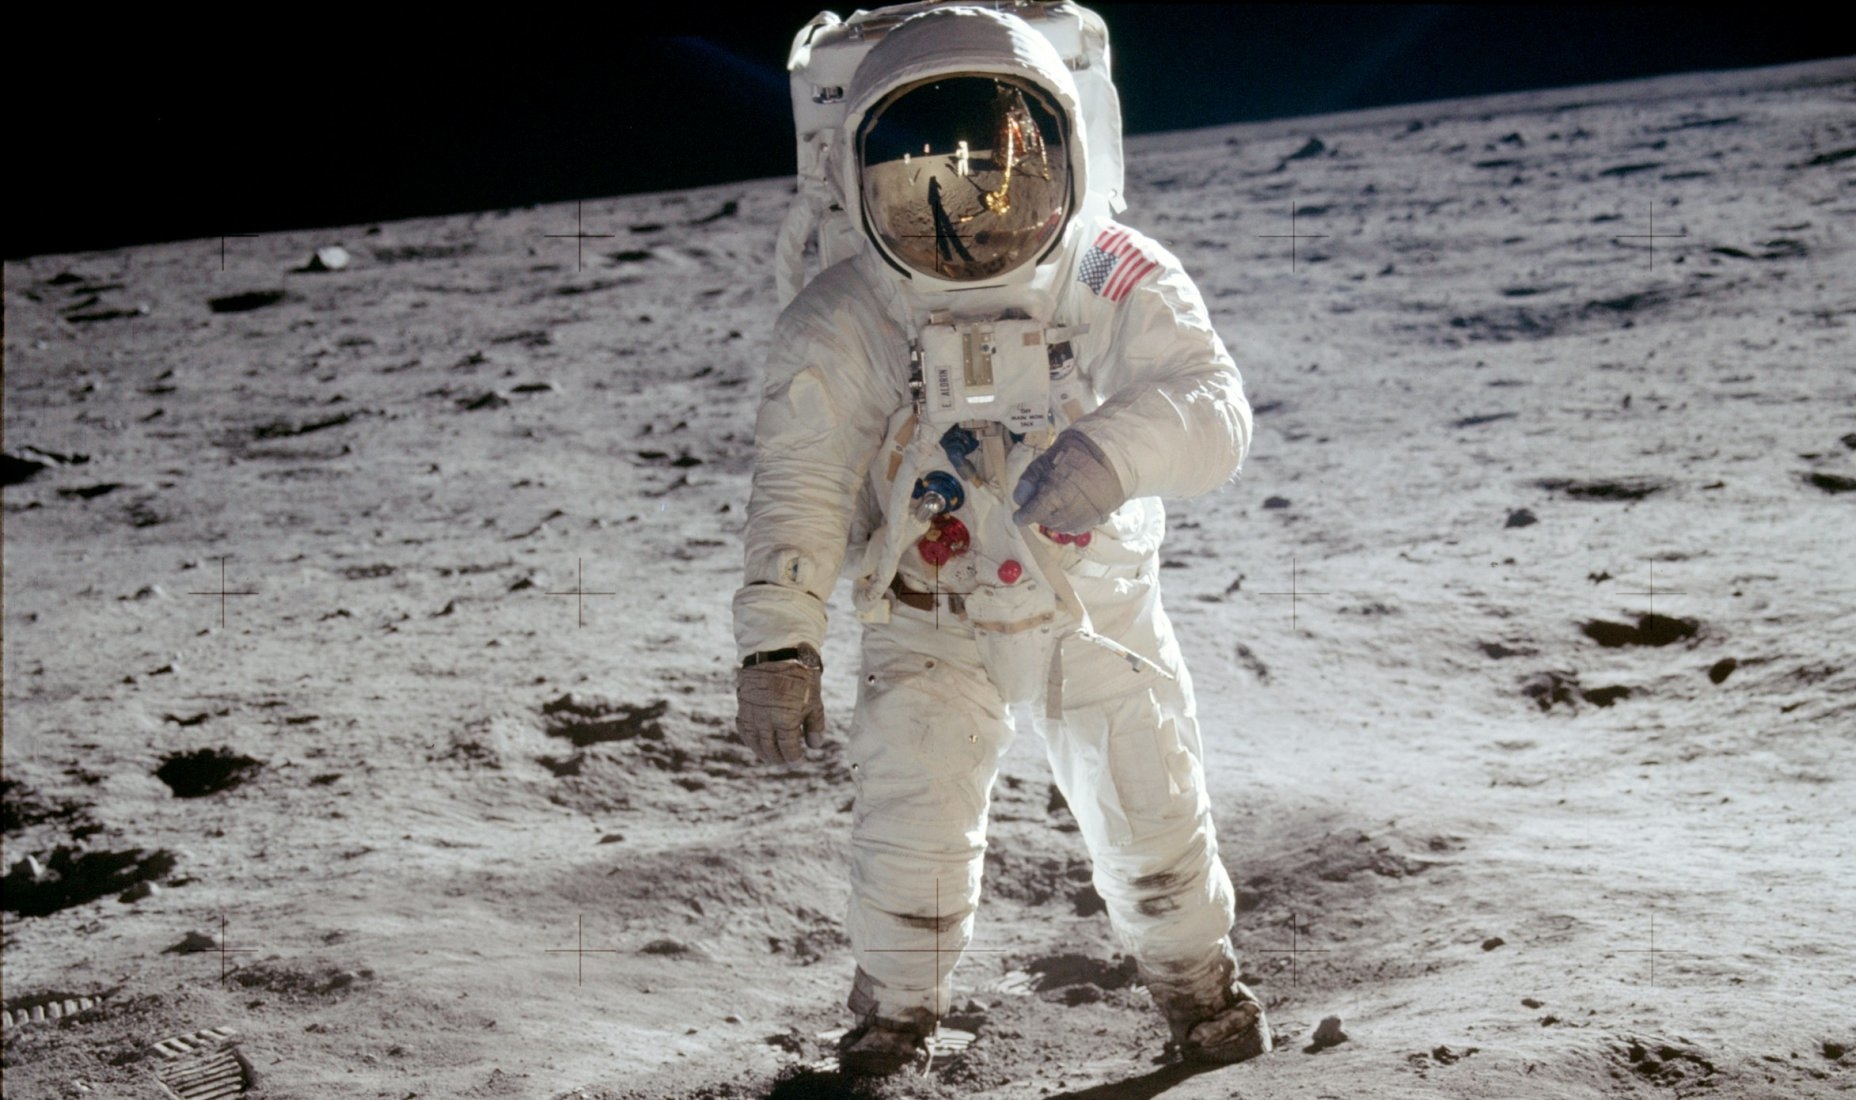 first person to visit on moon